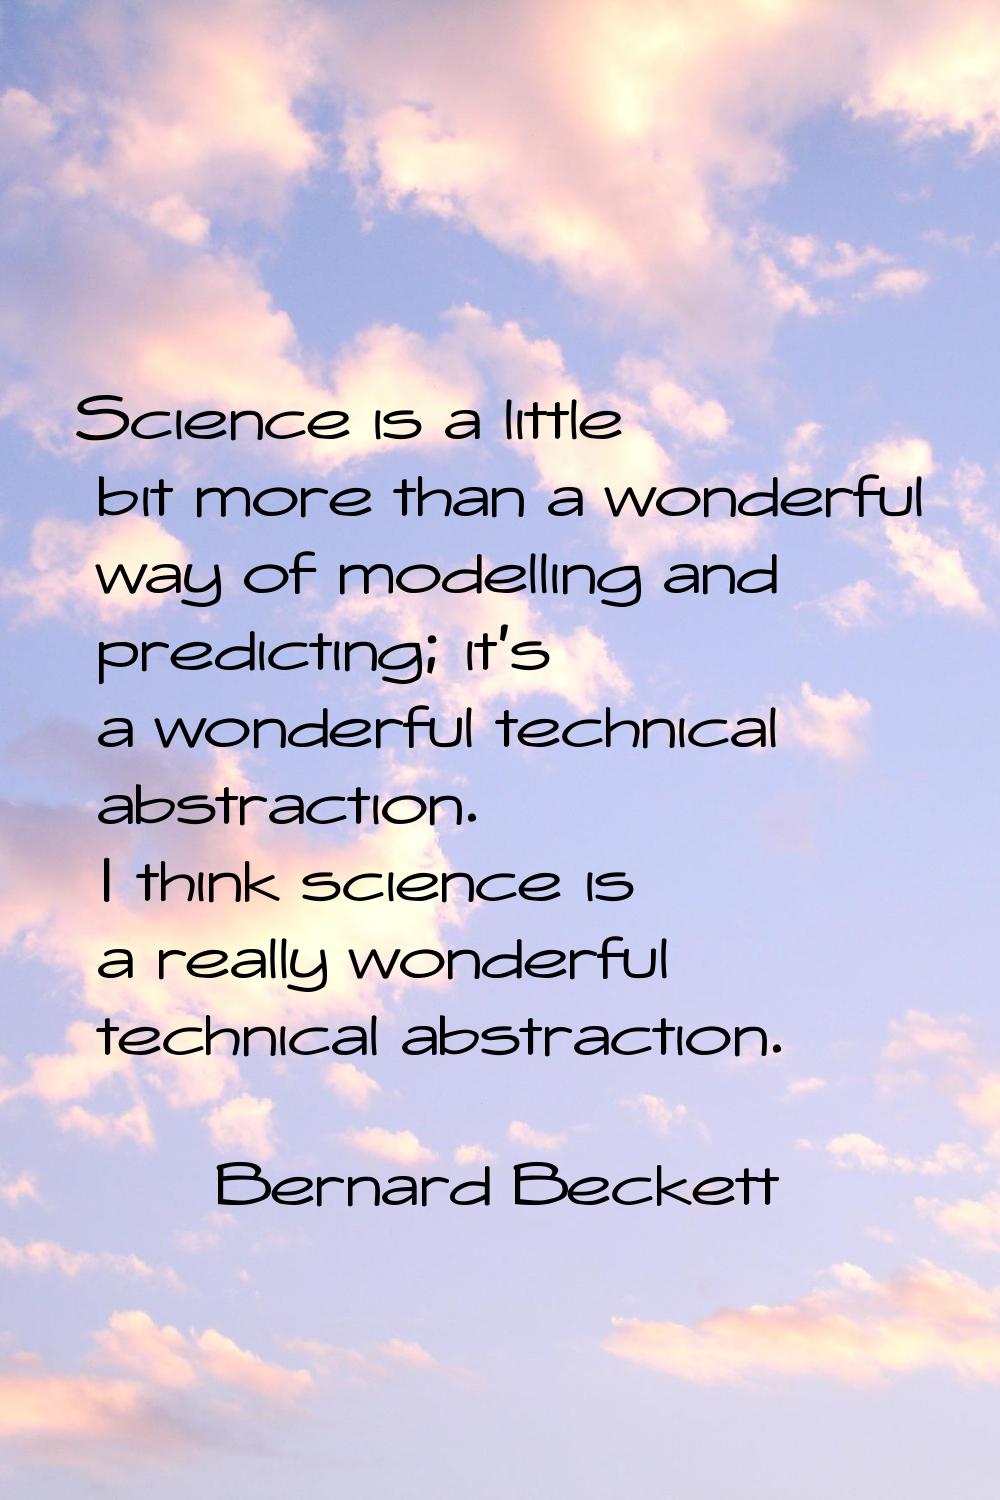 Science is a little bit more than a wonderful way of modelling and predicting; it's a wonderful tec